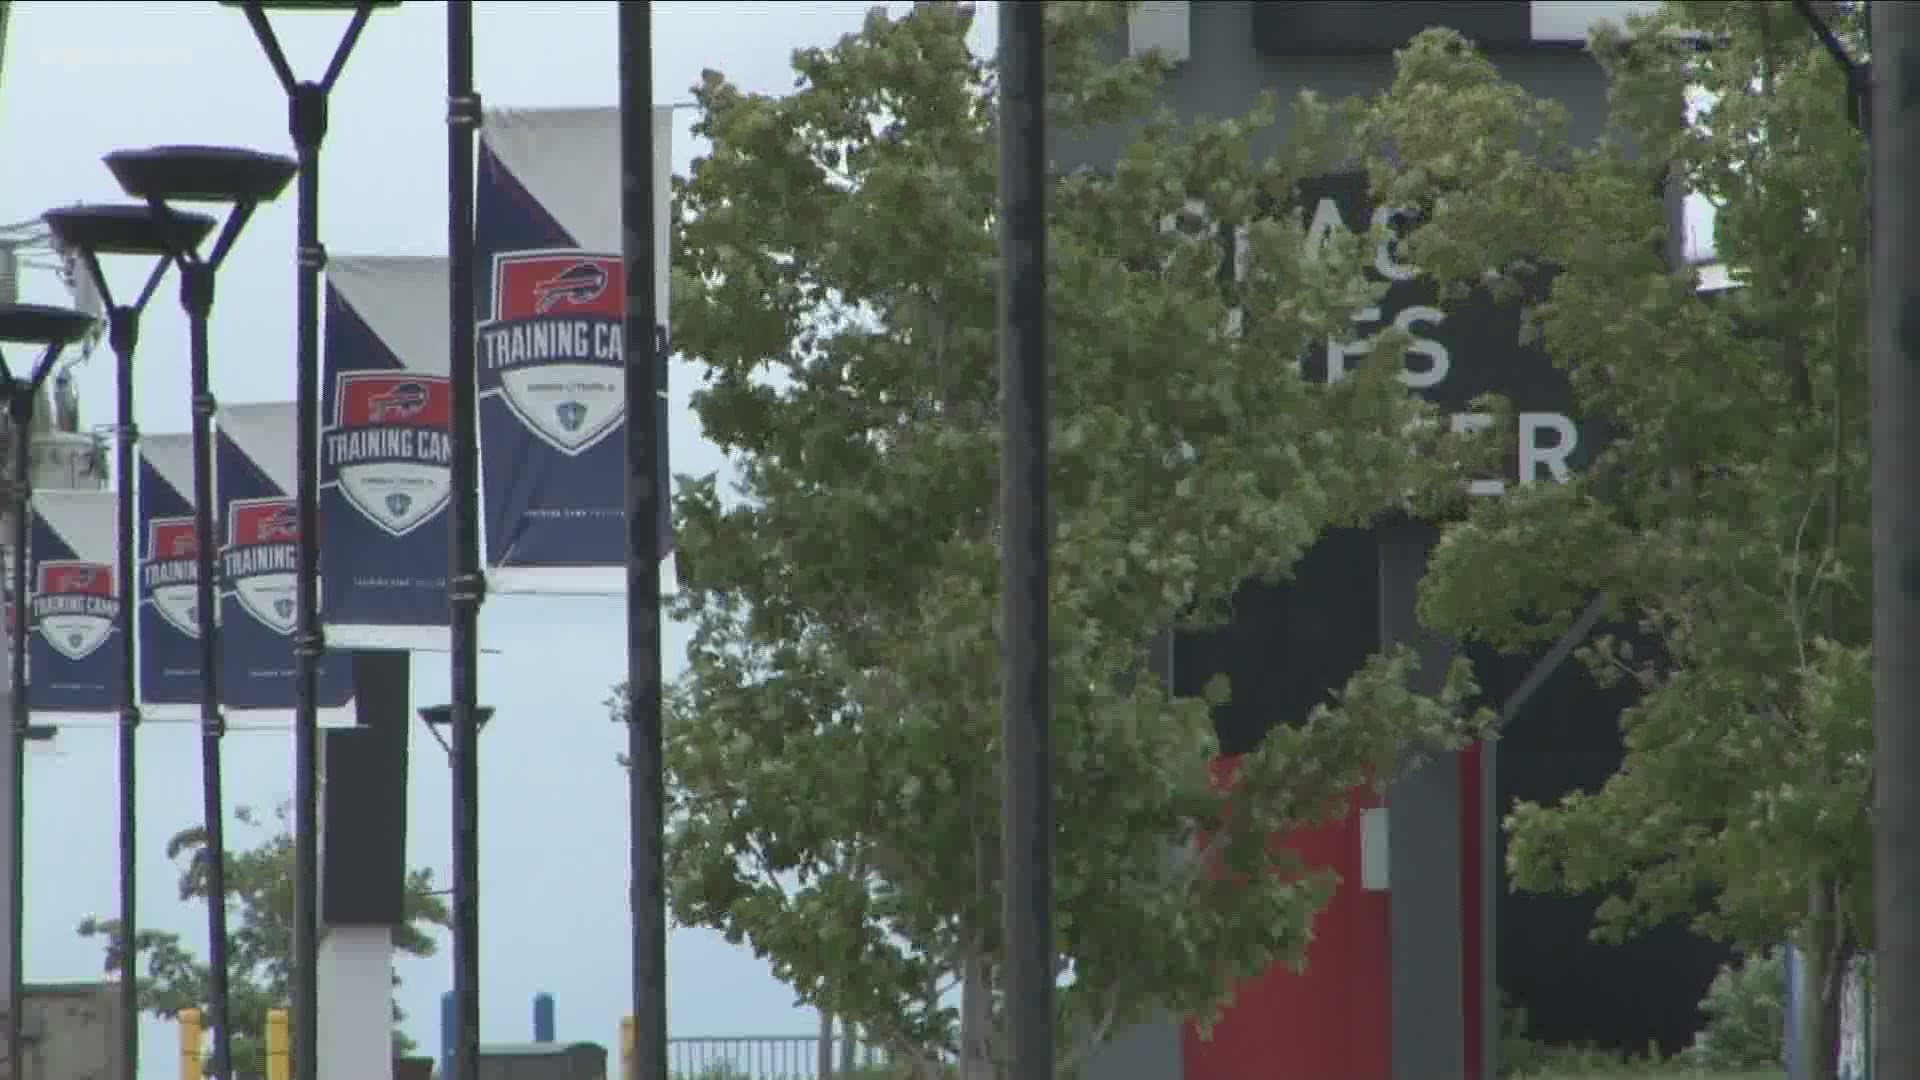 The Bills have started training camp, but instead of being out in Pittsford like usual, they'll be preparing for the fall season at their facilities in Orchard Park.